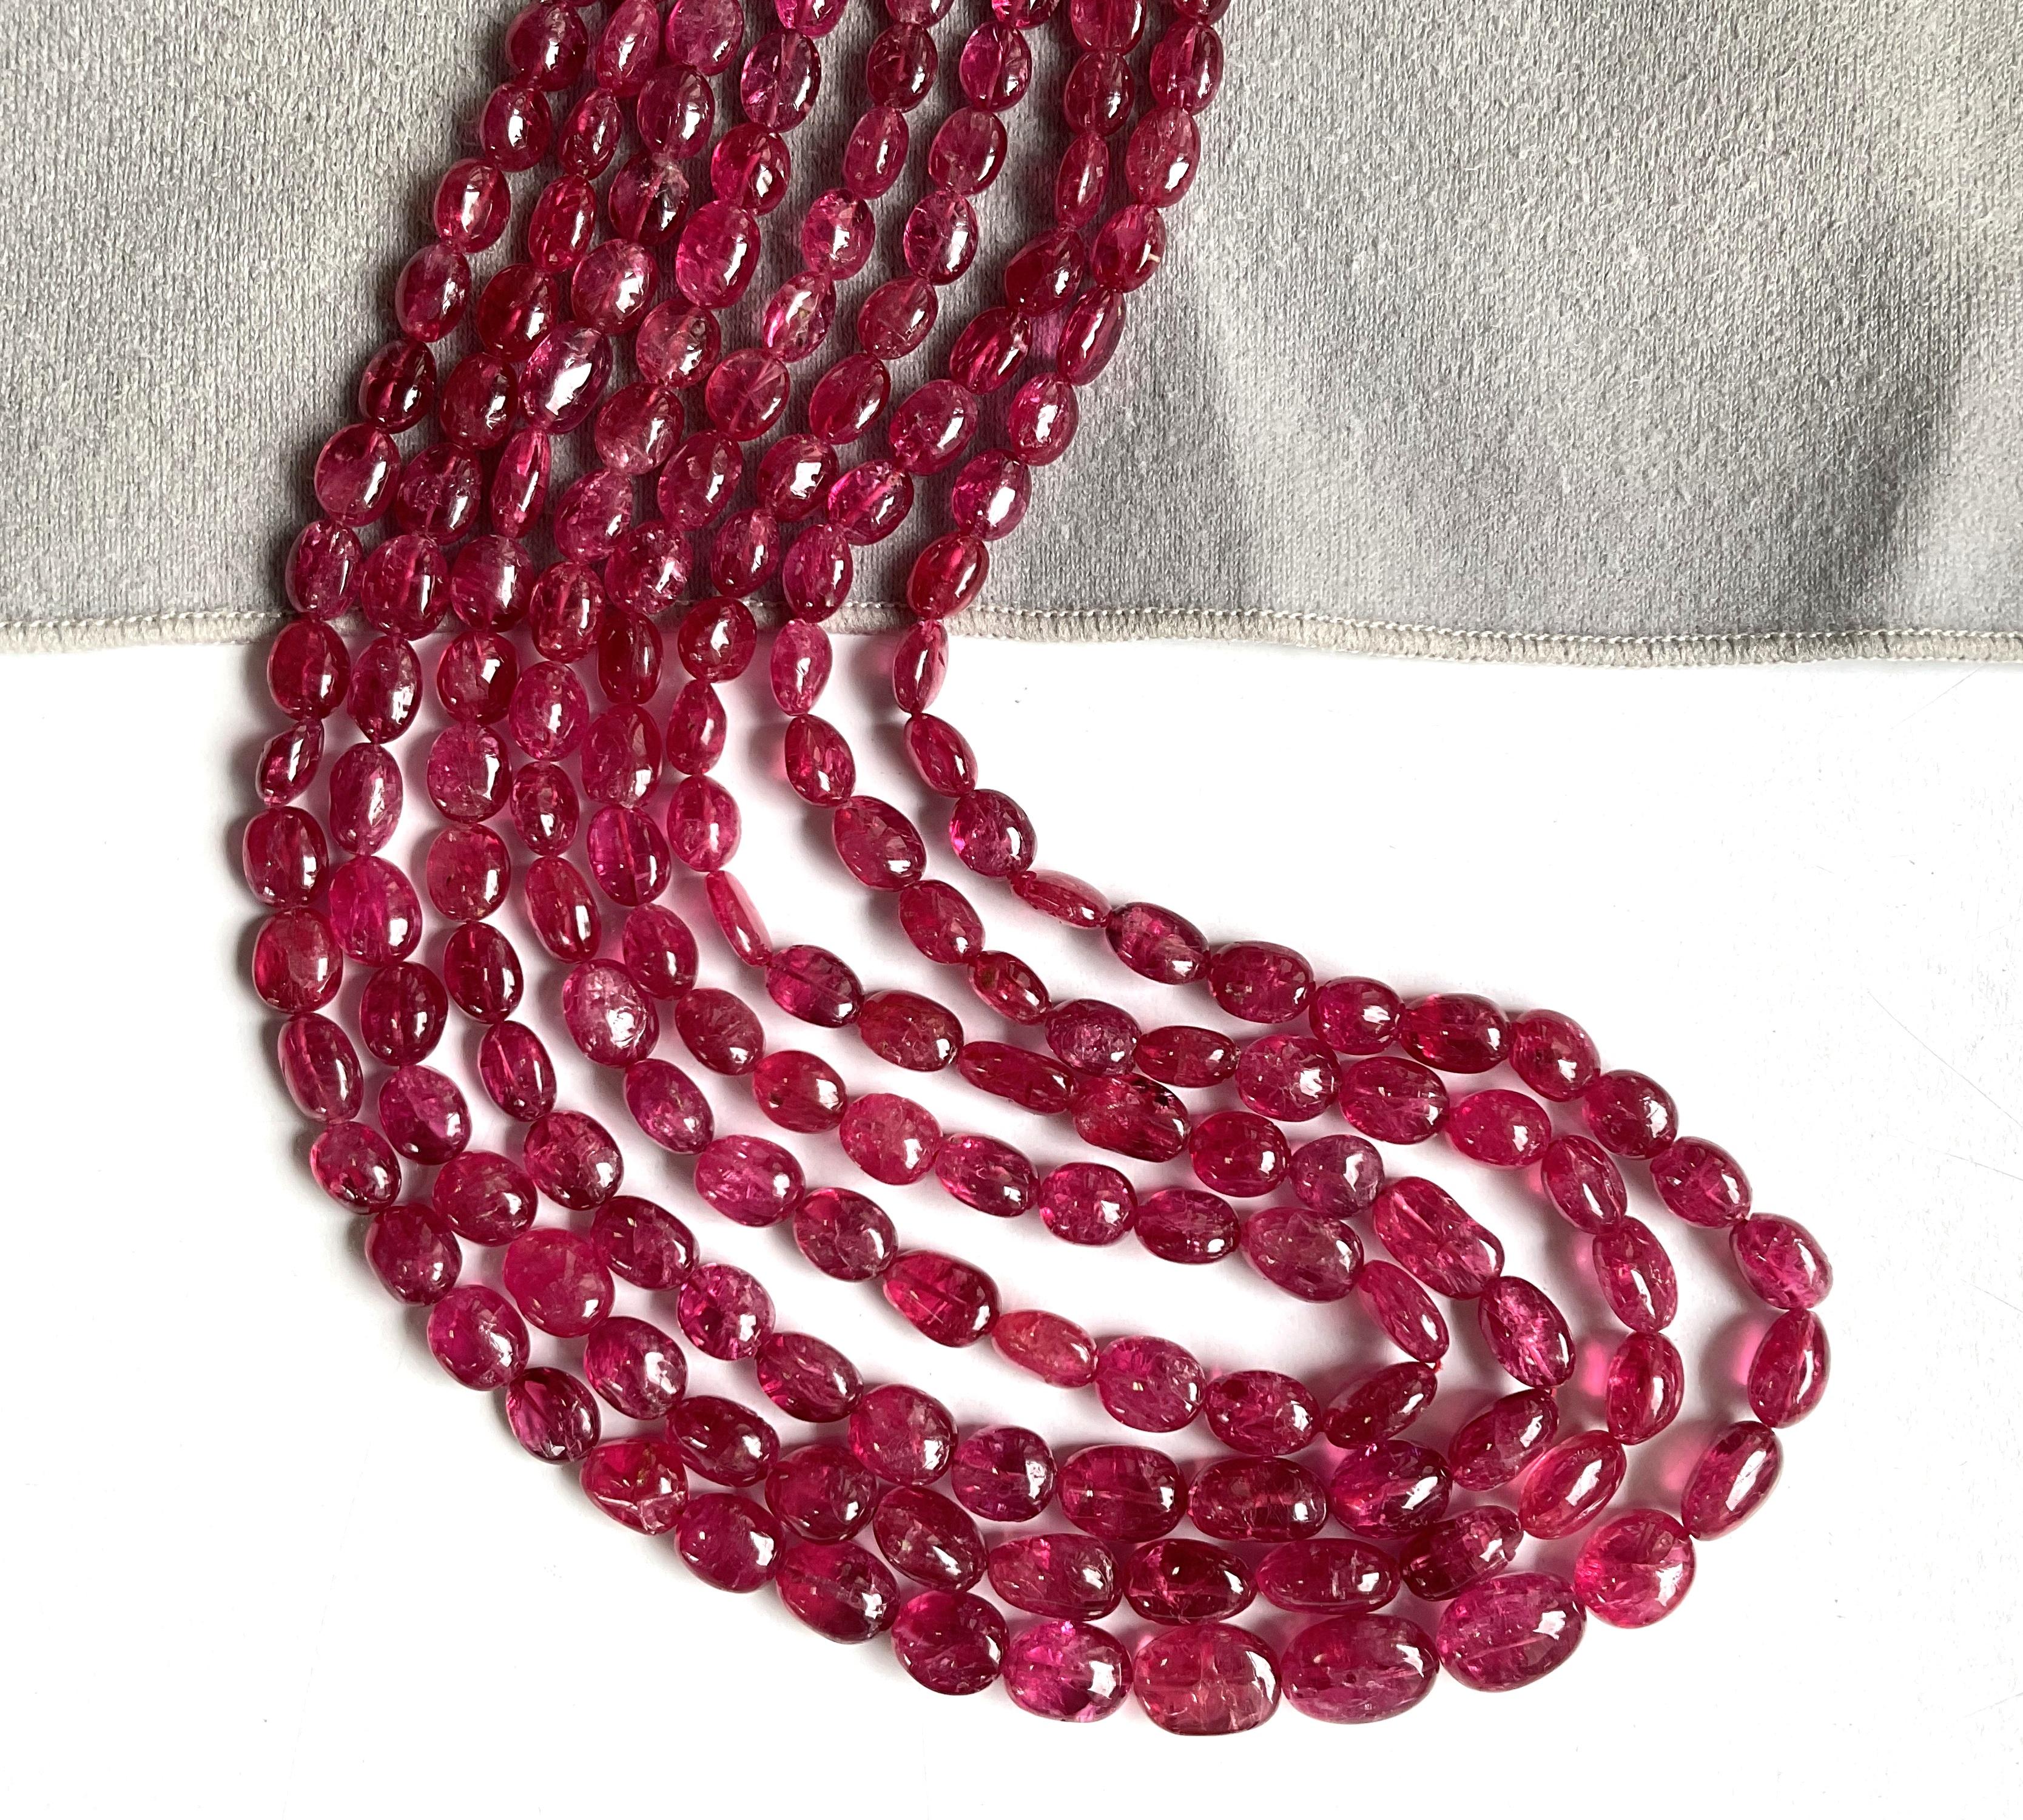 548.75 Carats Burma Red Spinel Top Quality Tumble Plain Natural Gemstone For Sale 2